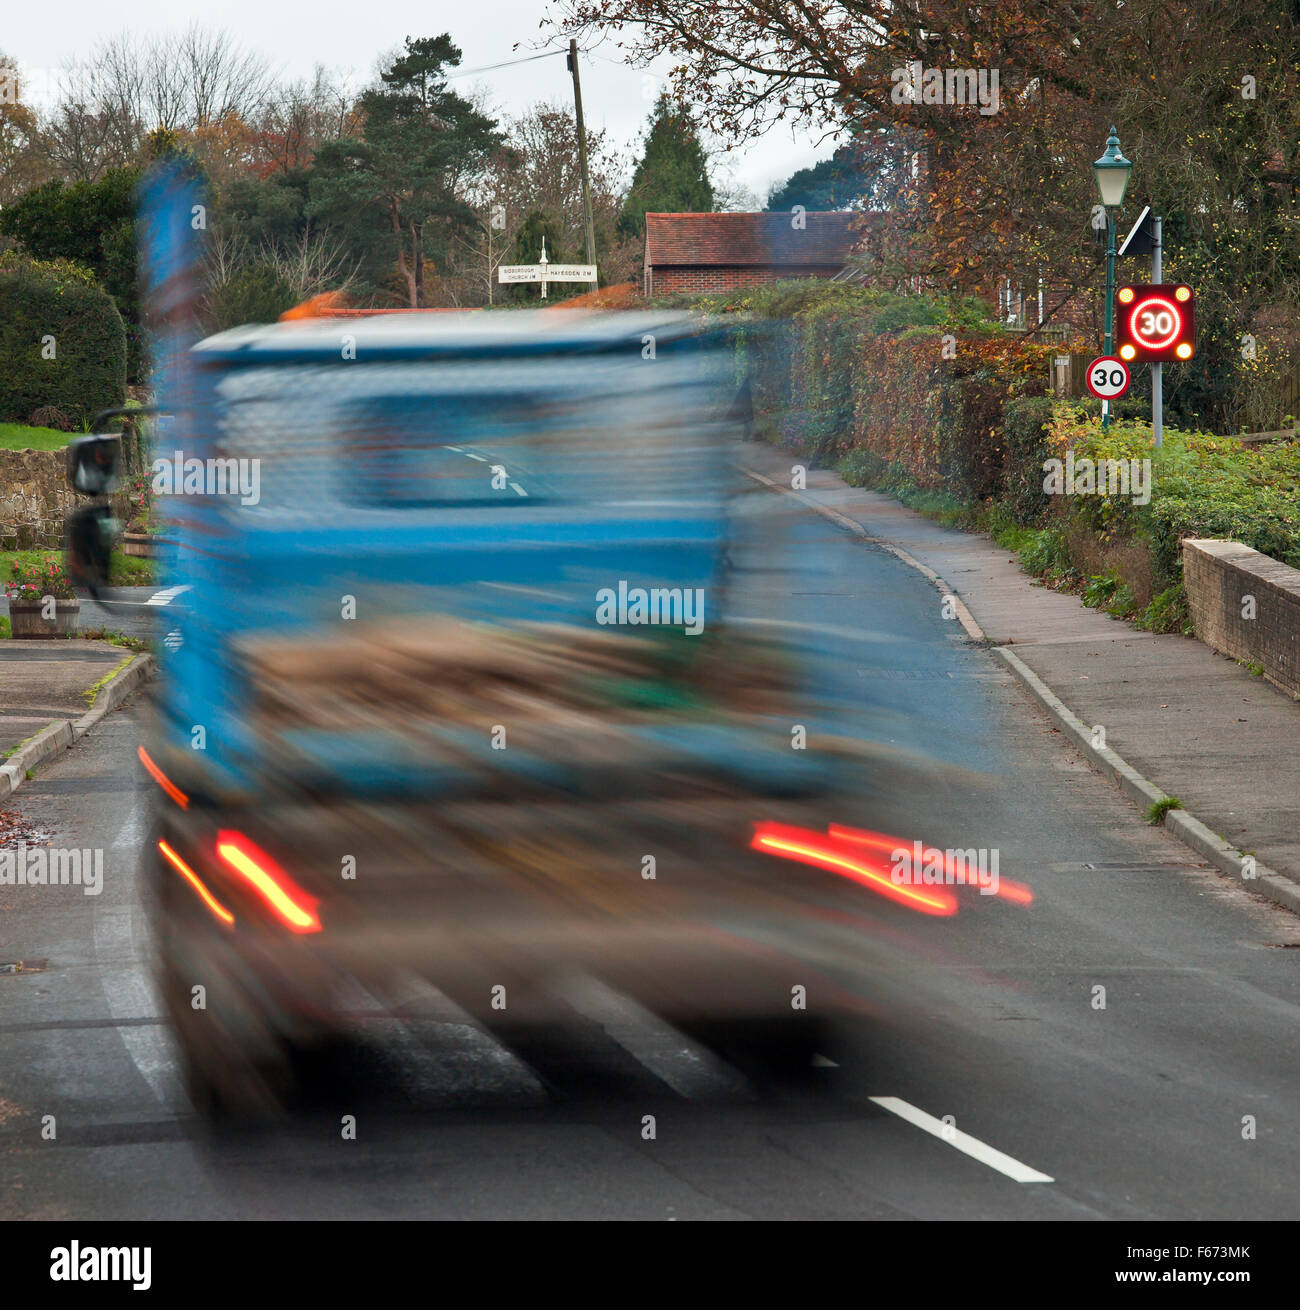 Speeding truck passing through a rural village, with the over 30mph warning sign flashing. Stock Photo